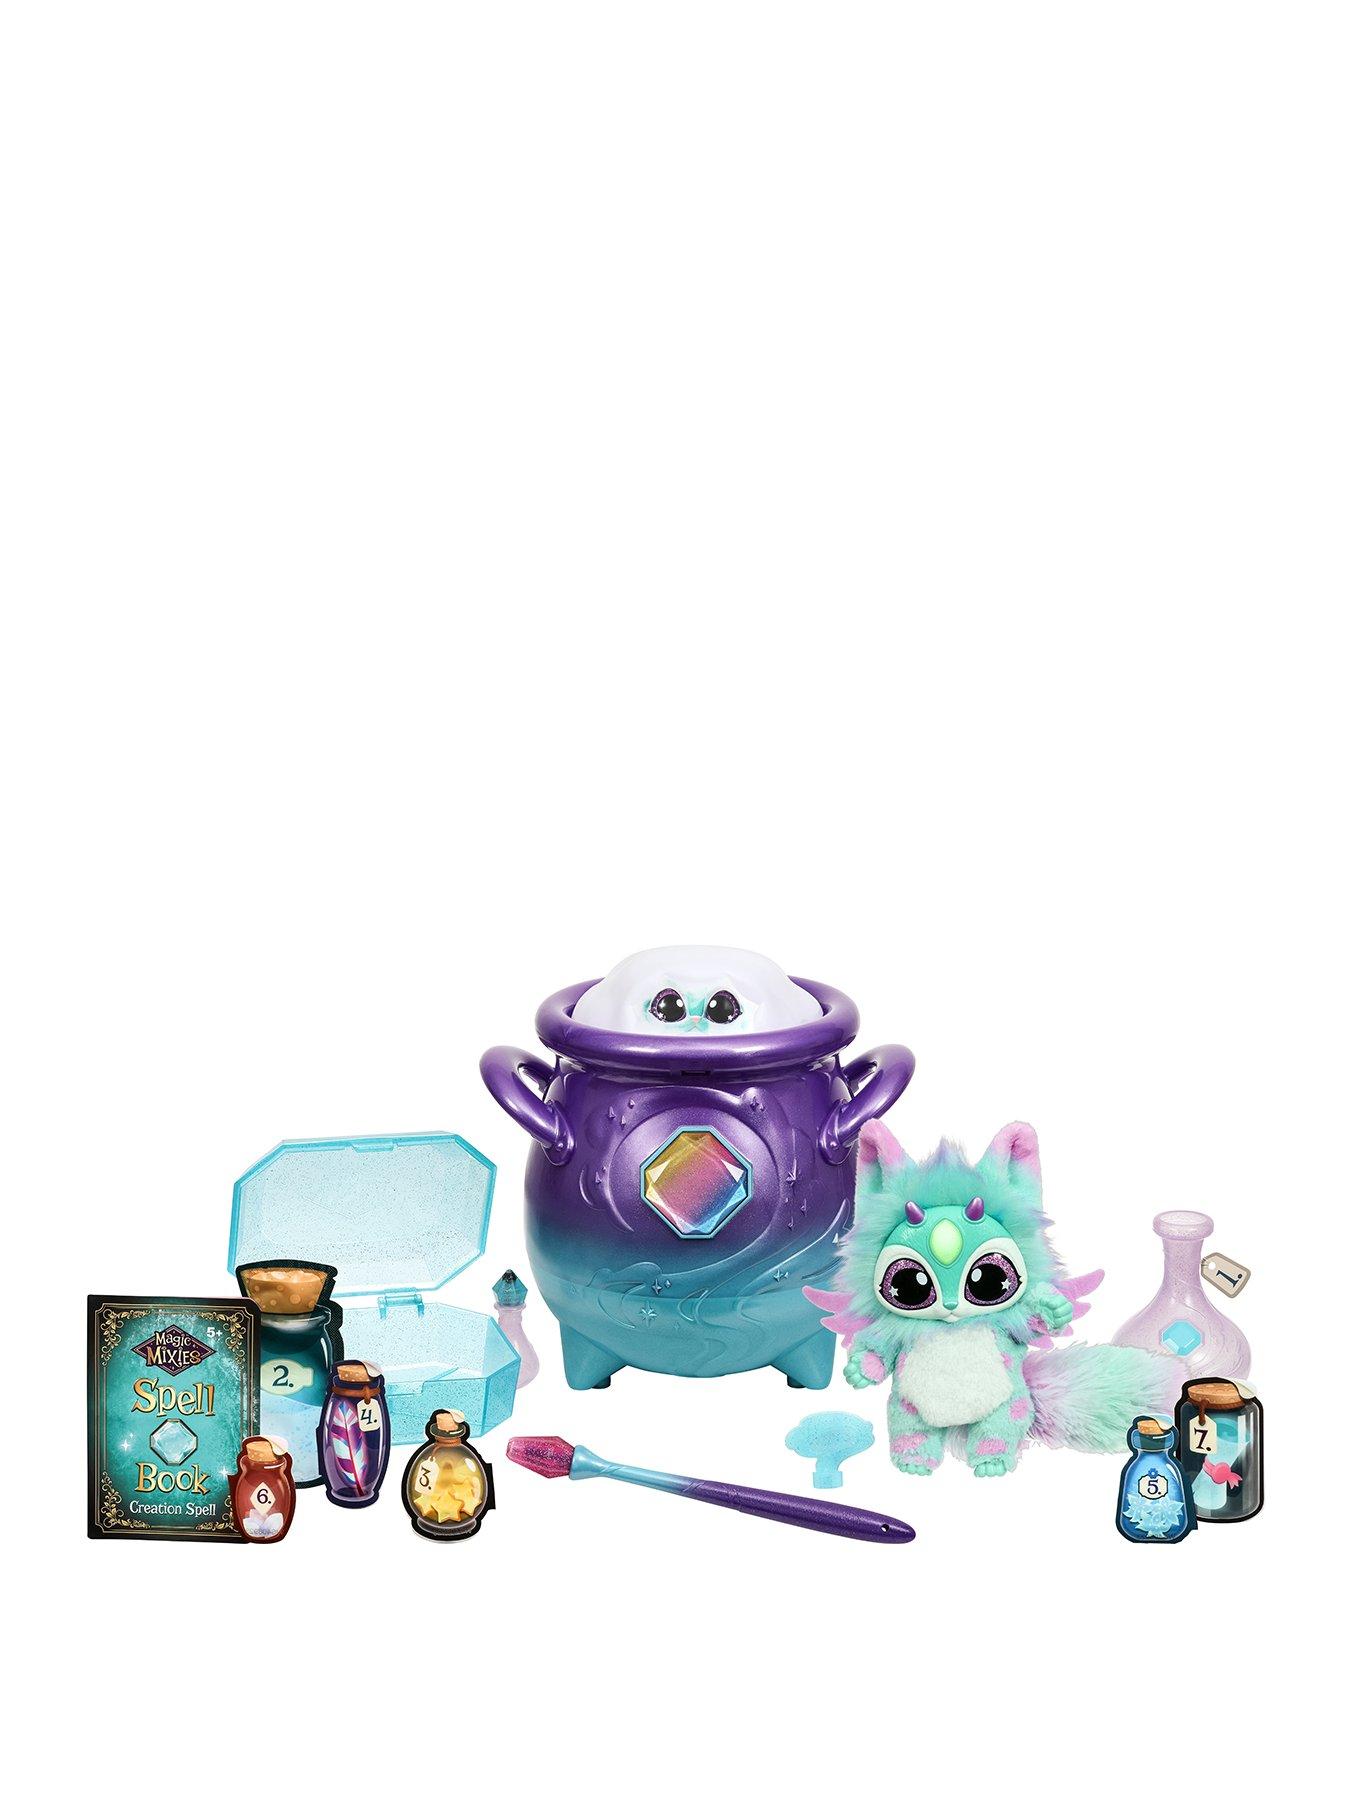 Magic Mixies Magical Mist and Spells Refill Pack for Magical Crystal Ball,  Electronic Pet, Ages 5+ 